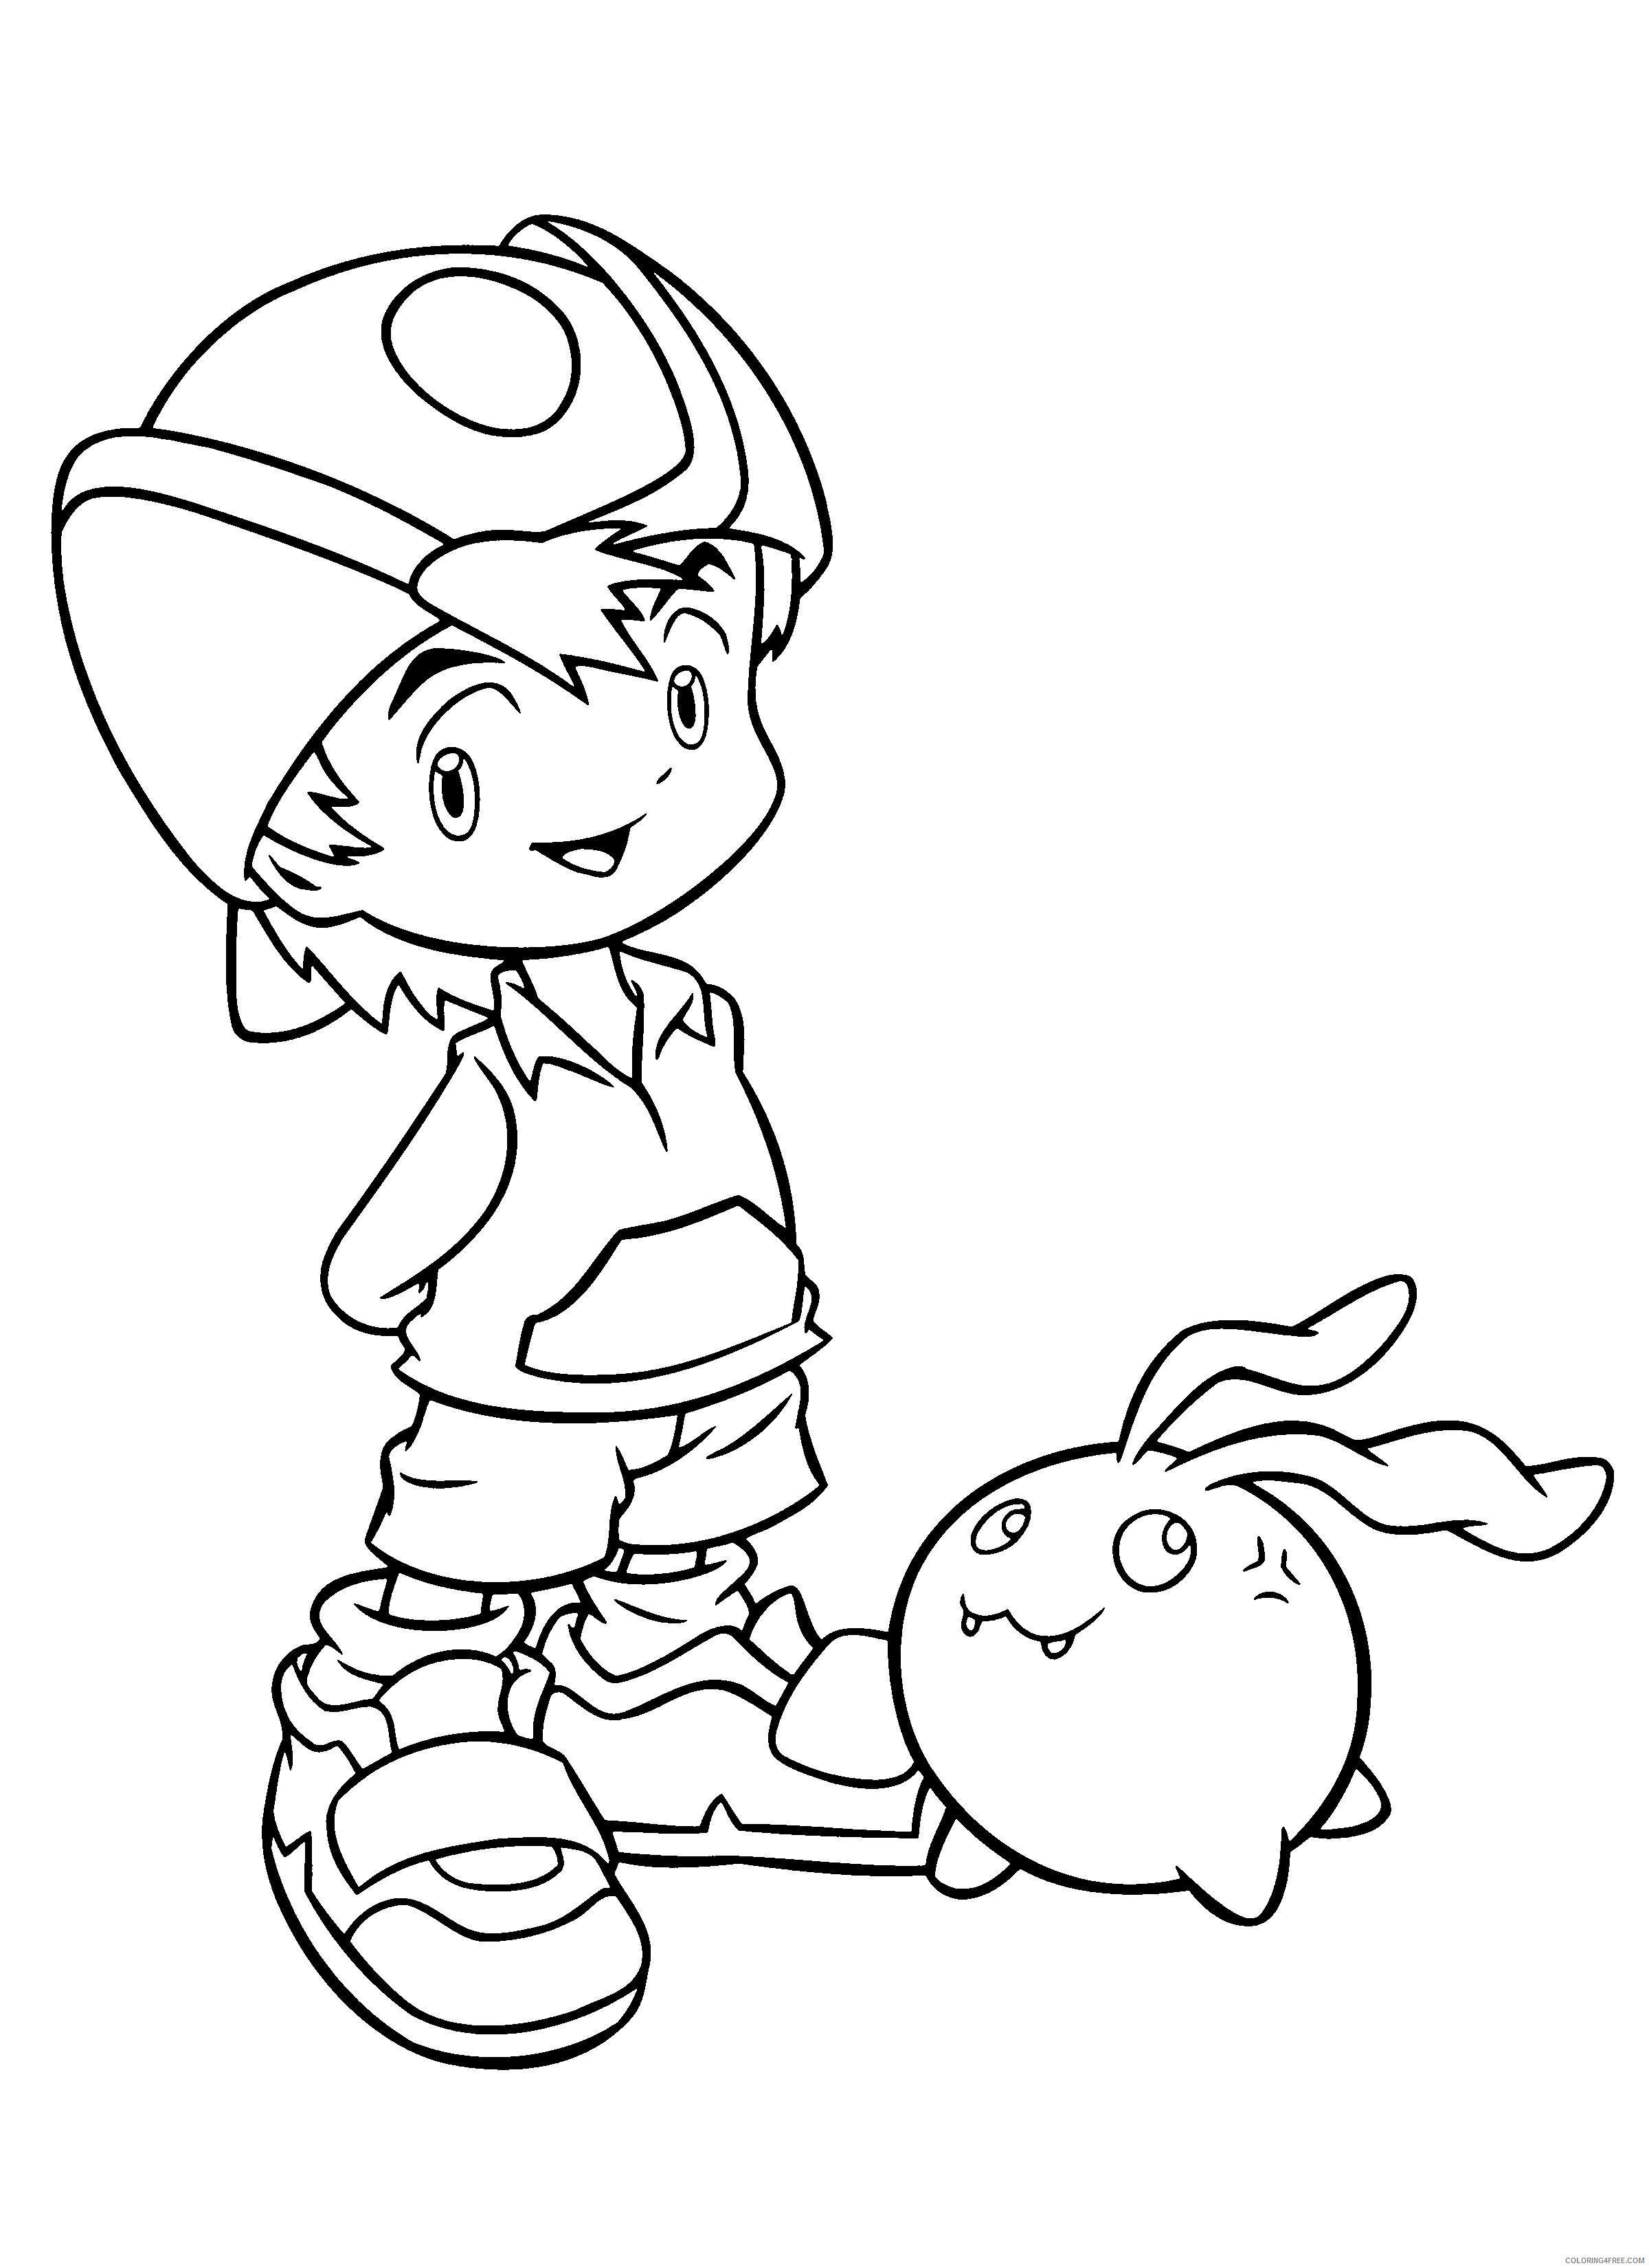 Digimon Printable Coloring Pages Anime digimon 262 2021 0343 Coloring4free